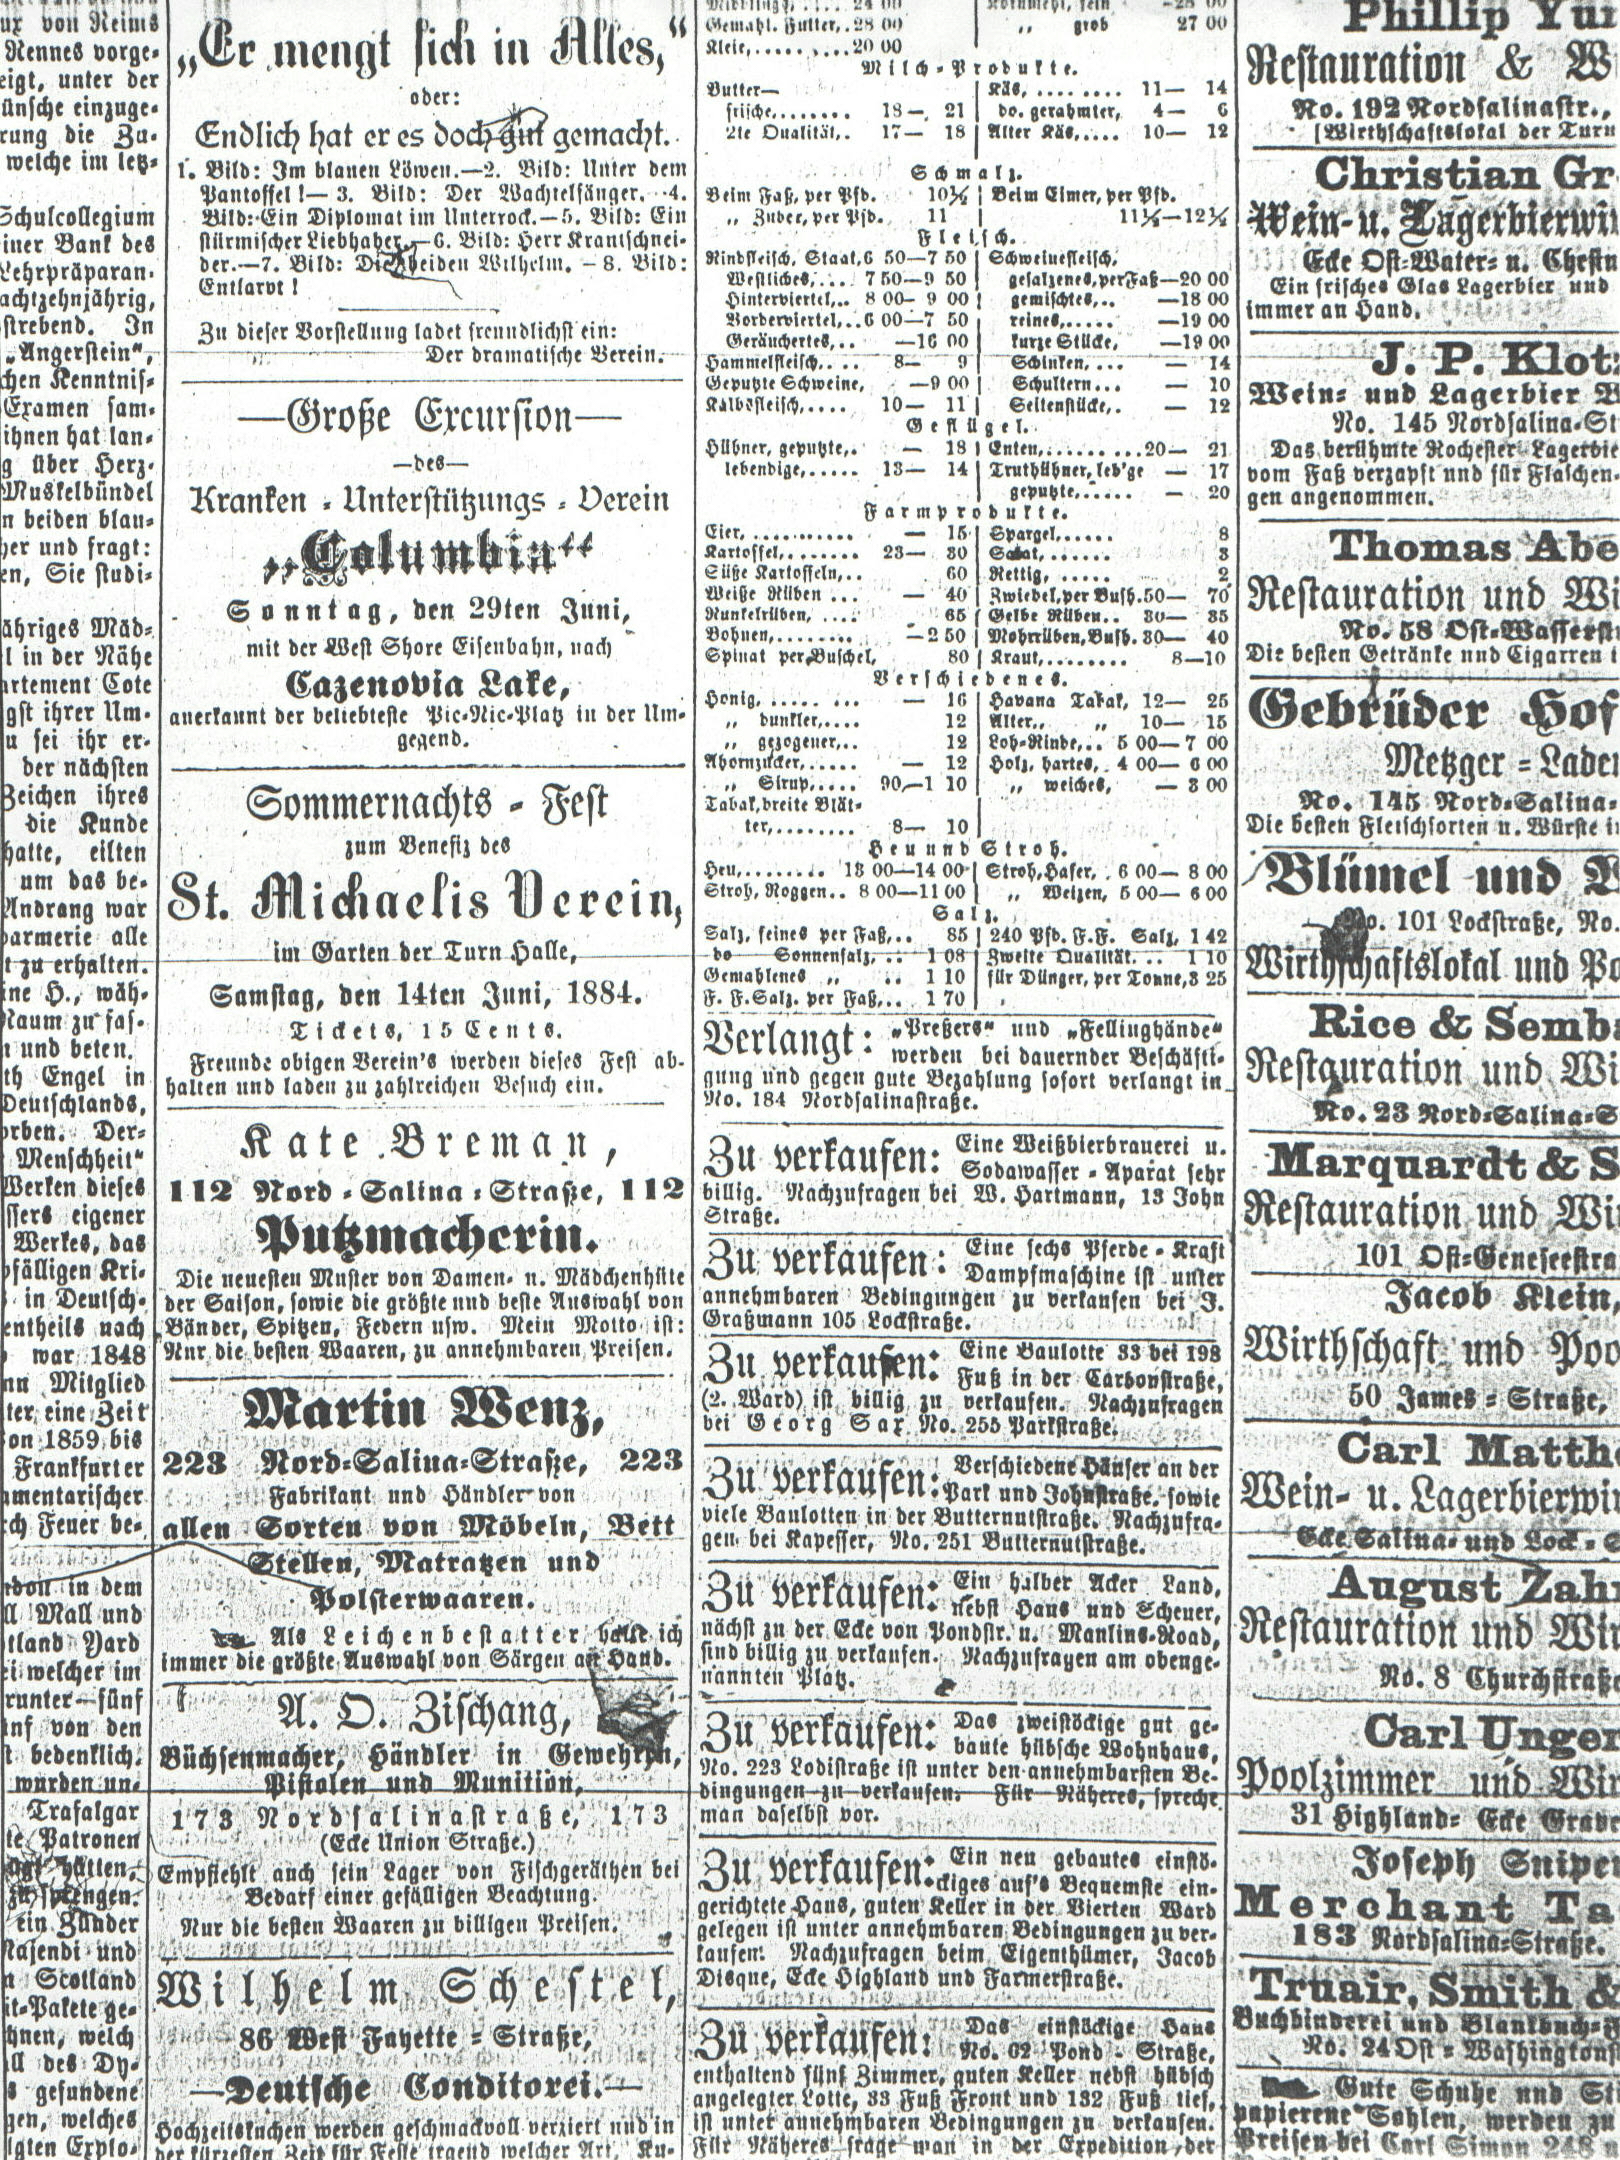 ads from the Syracuse Union, 5 
June 1884